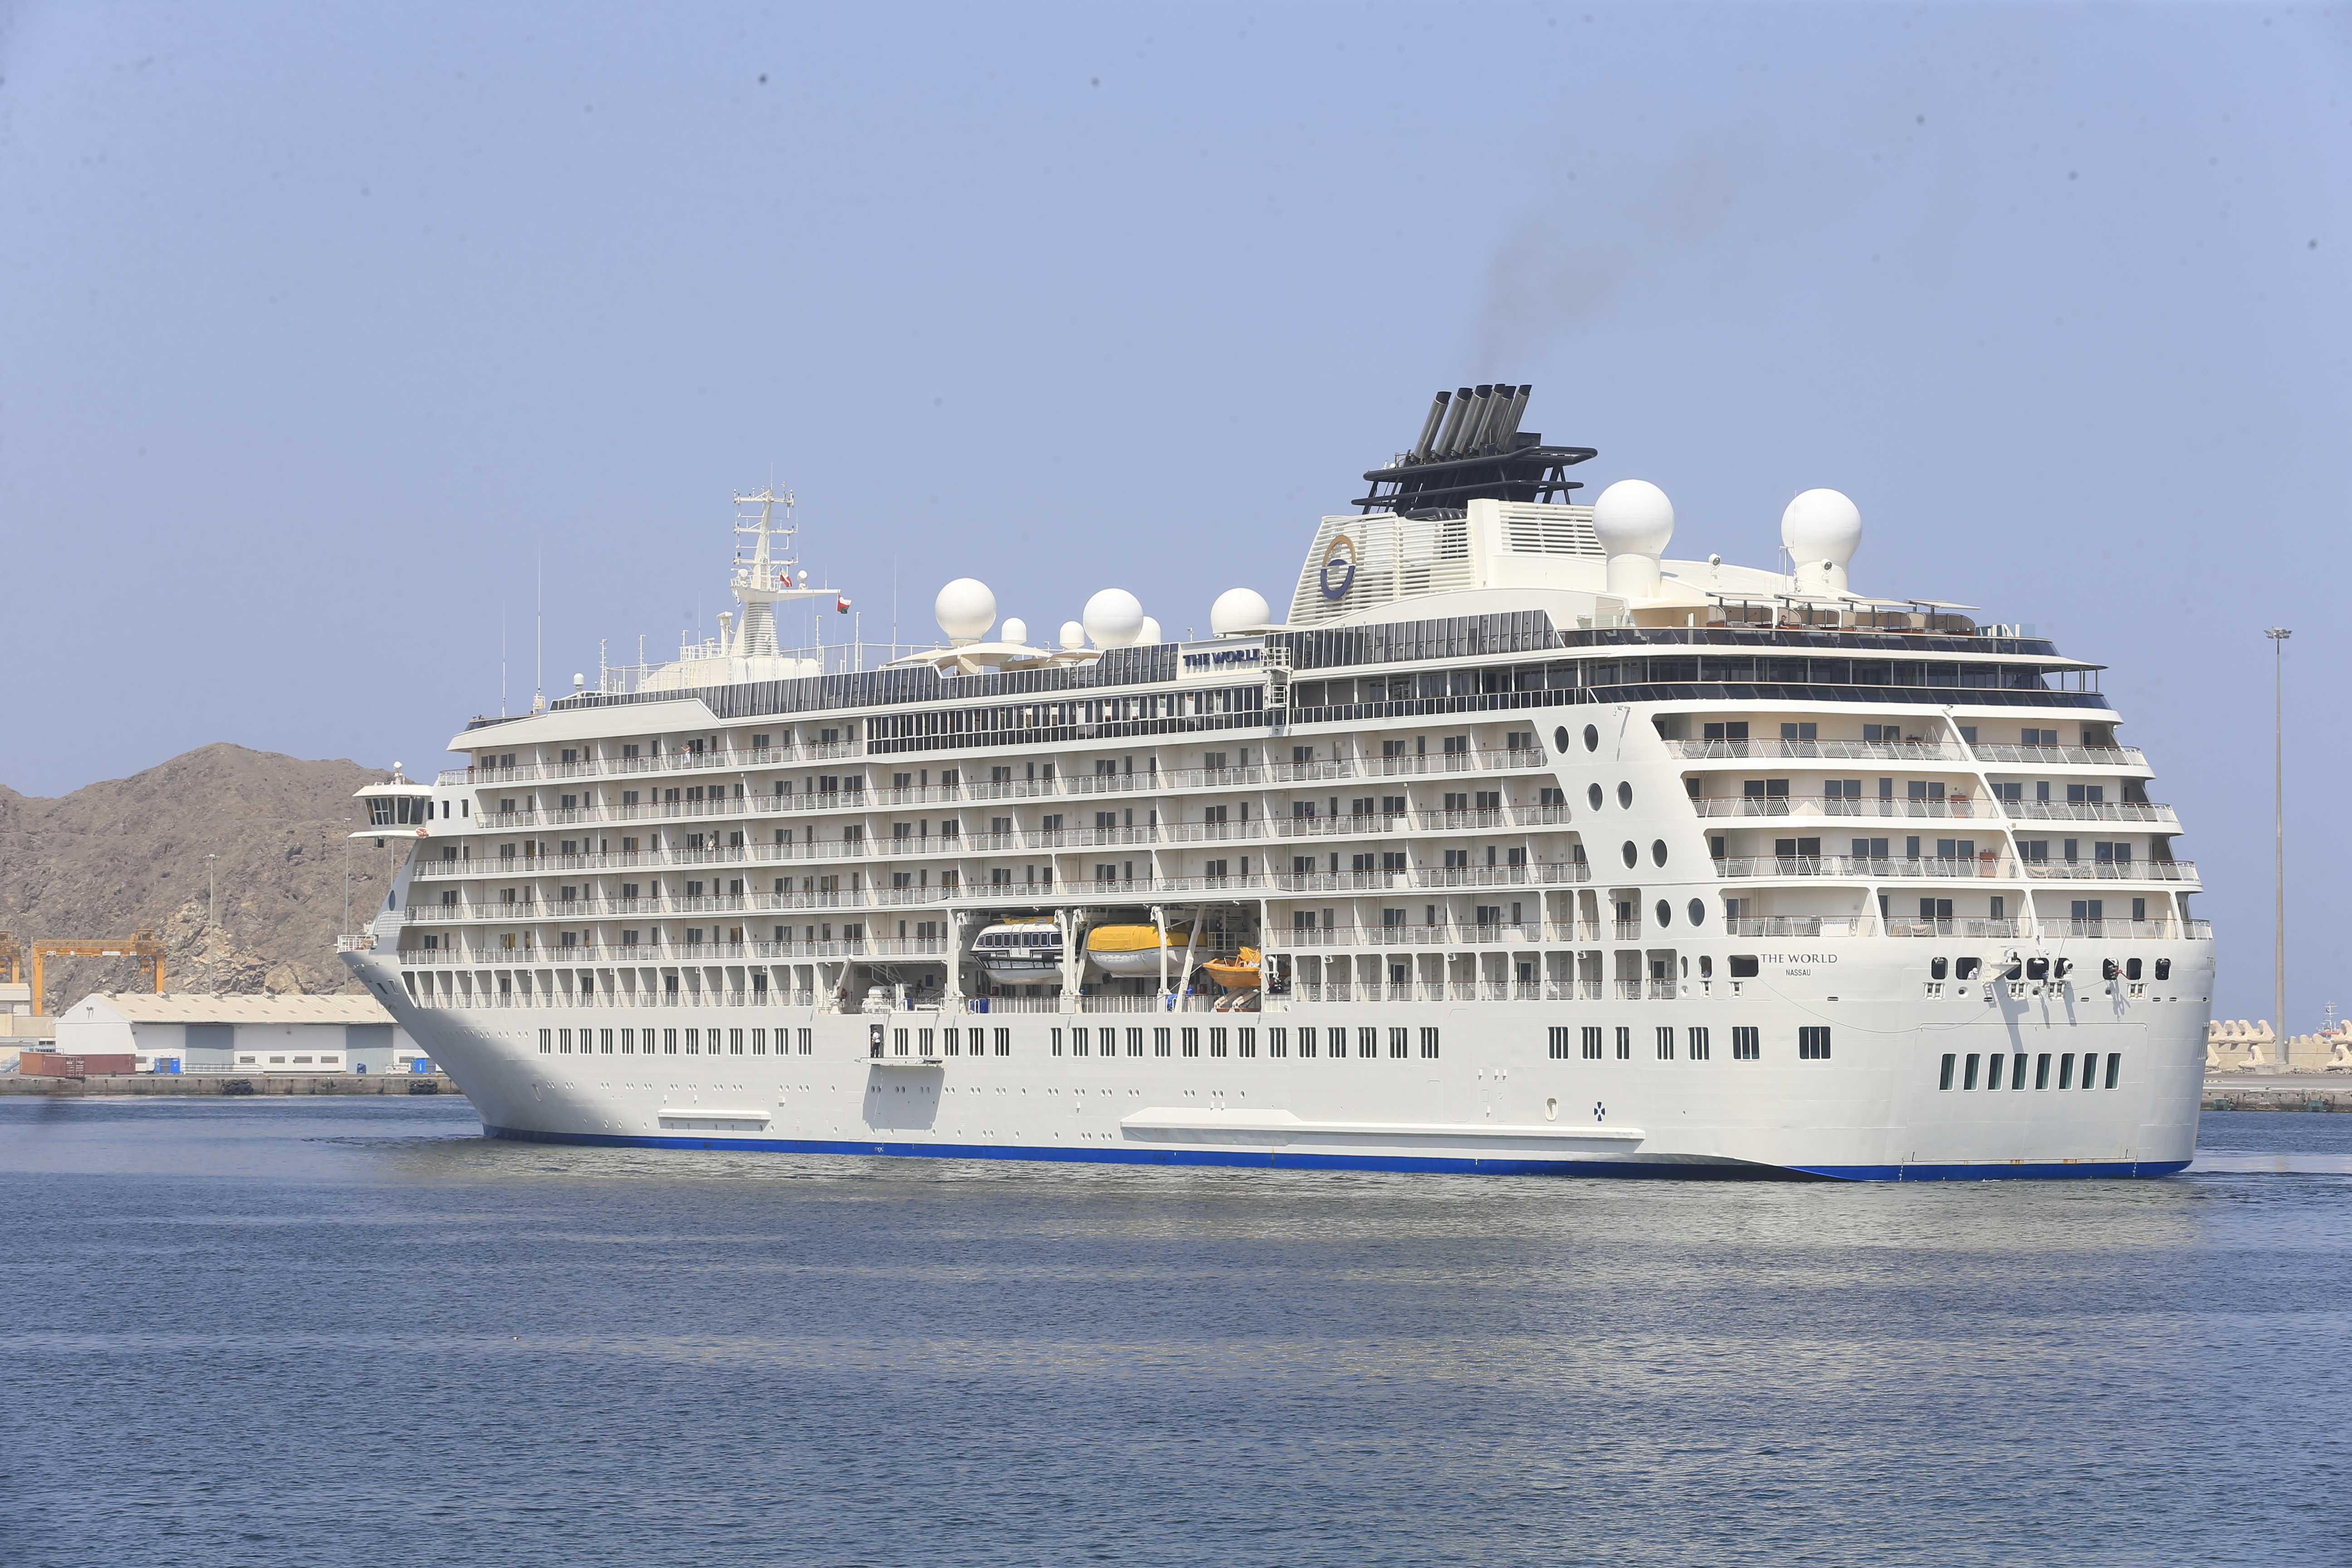 Oman tourism: More cruise ships not converting to more money for Muttrah souq sellers